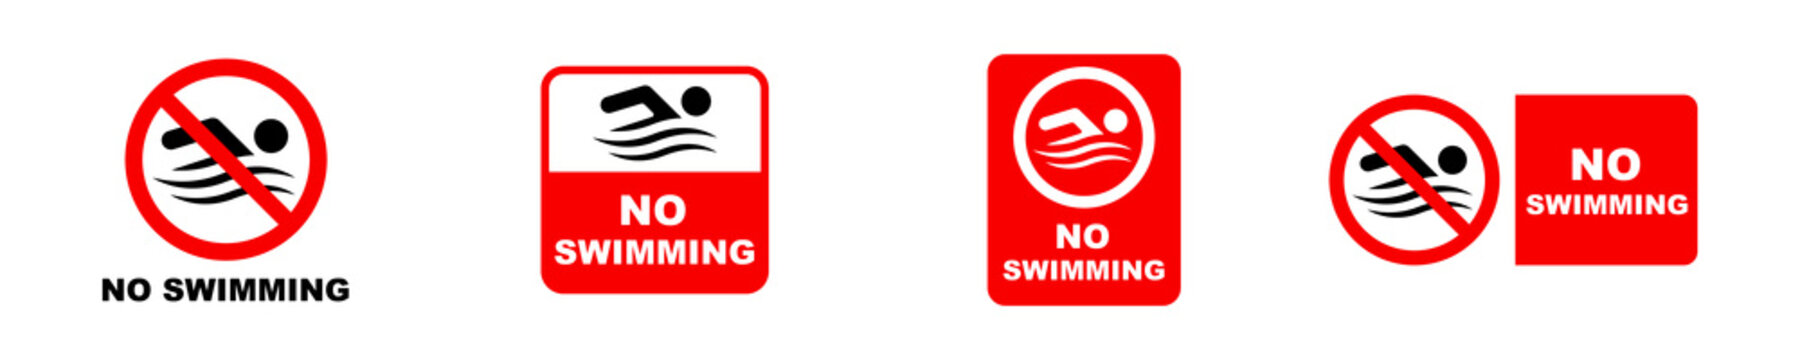 Set of no swimming vector sign. Red forbidden sign for swimmer. Warning signboard. 